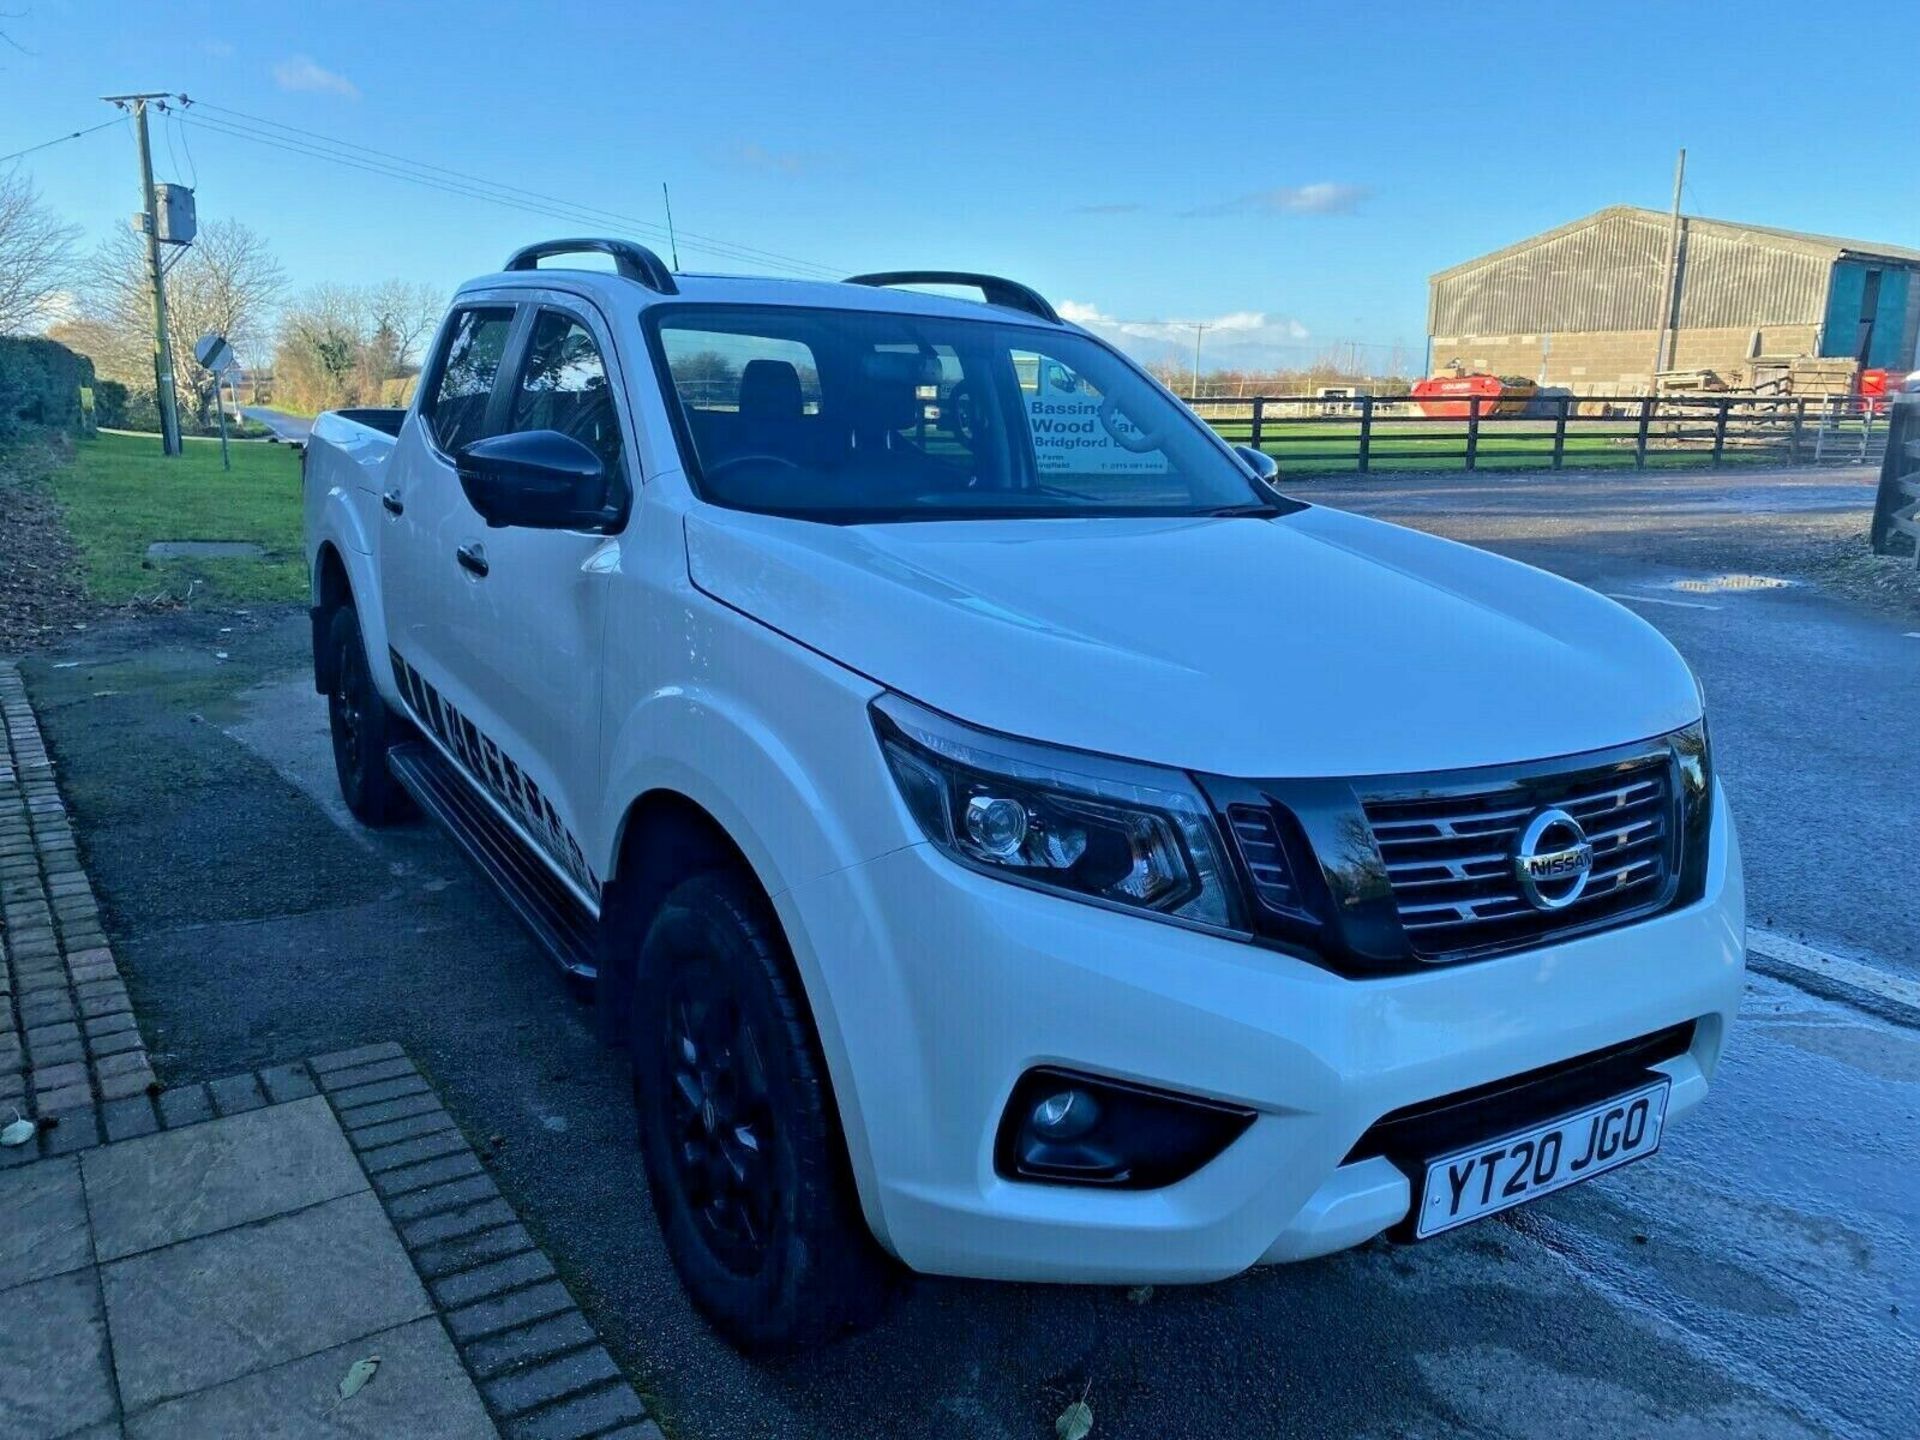 2020 NISSAN NAVARA N-GUARD DCI AUTO 4WD WHITE PICK UP, 1 OWNER FROM NEW, 21,971 MILES *PLUS VAT* - Image 2 of 11